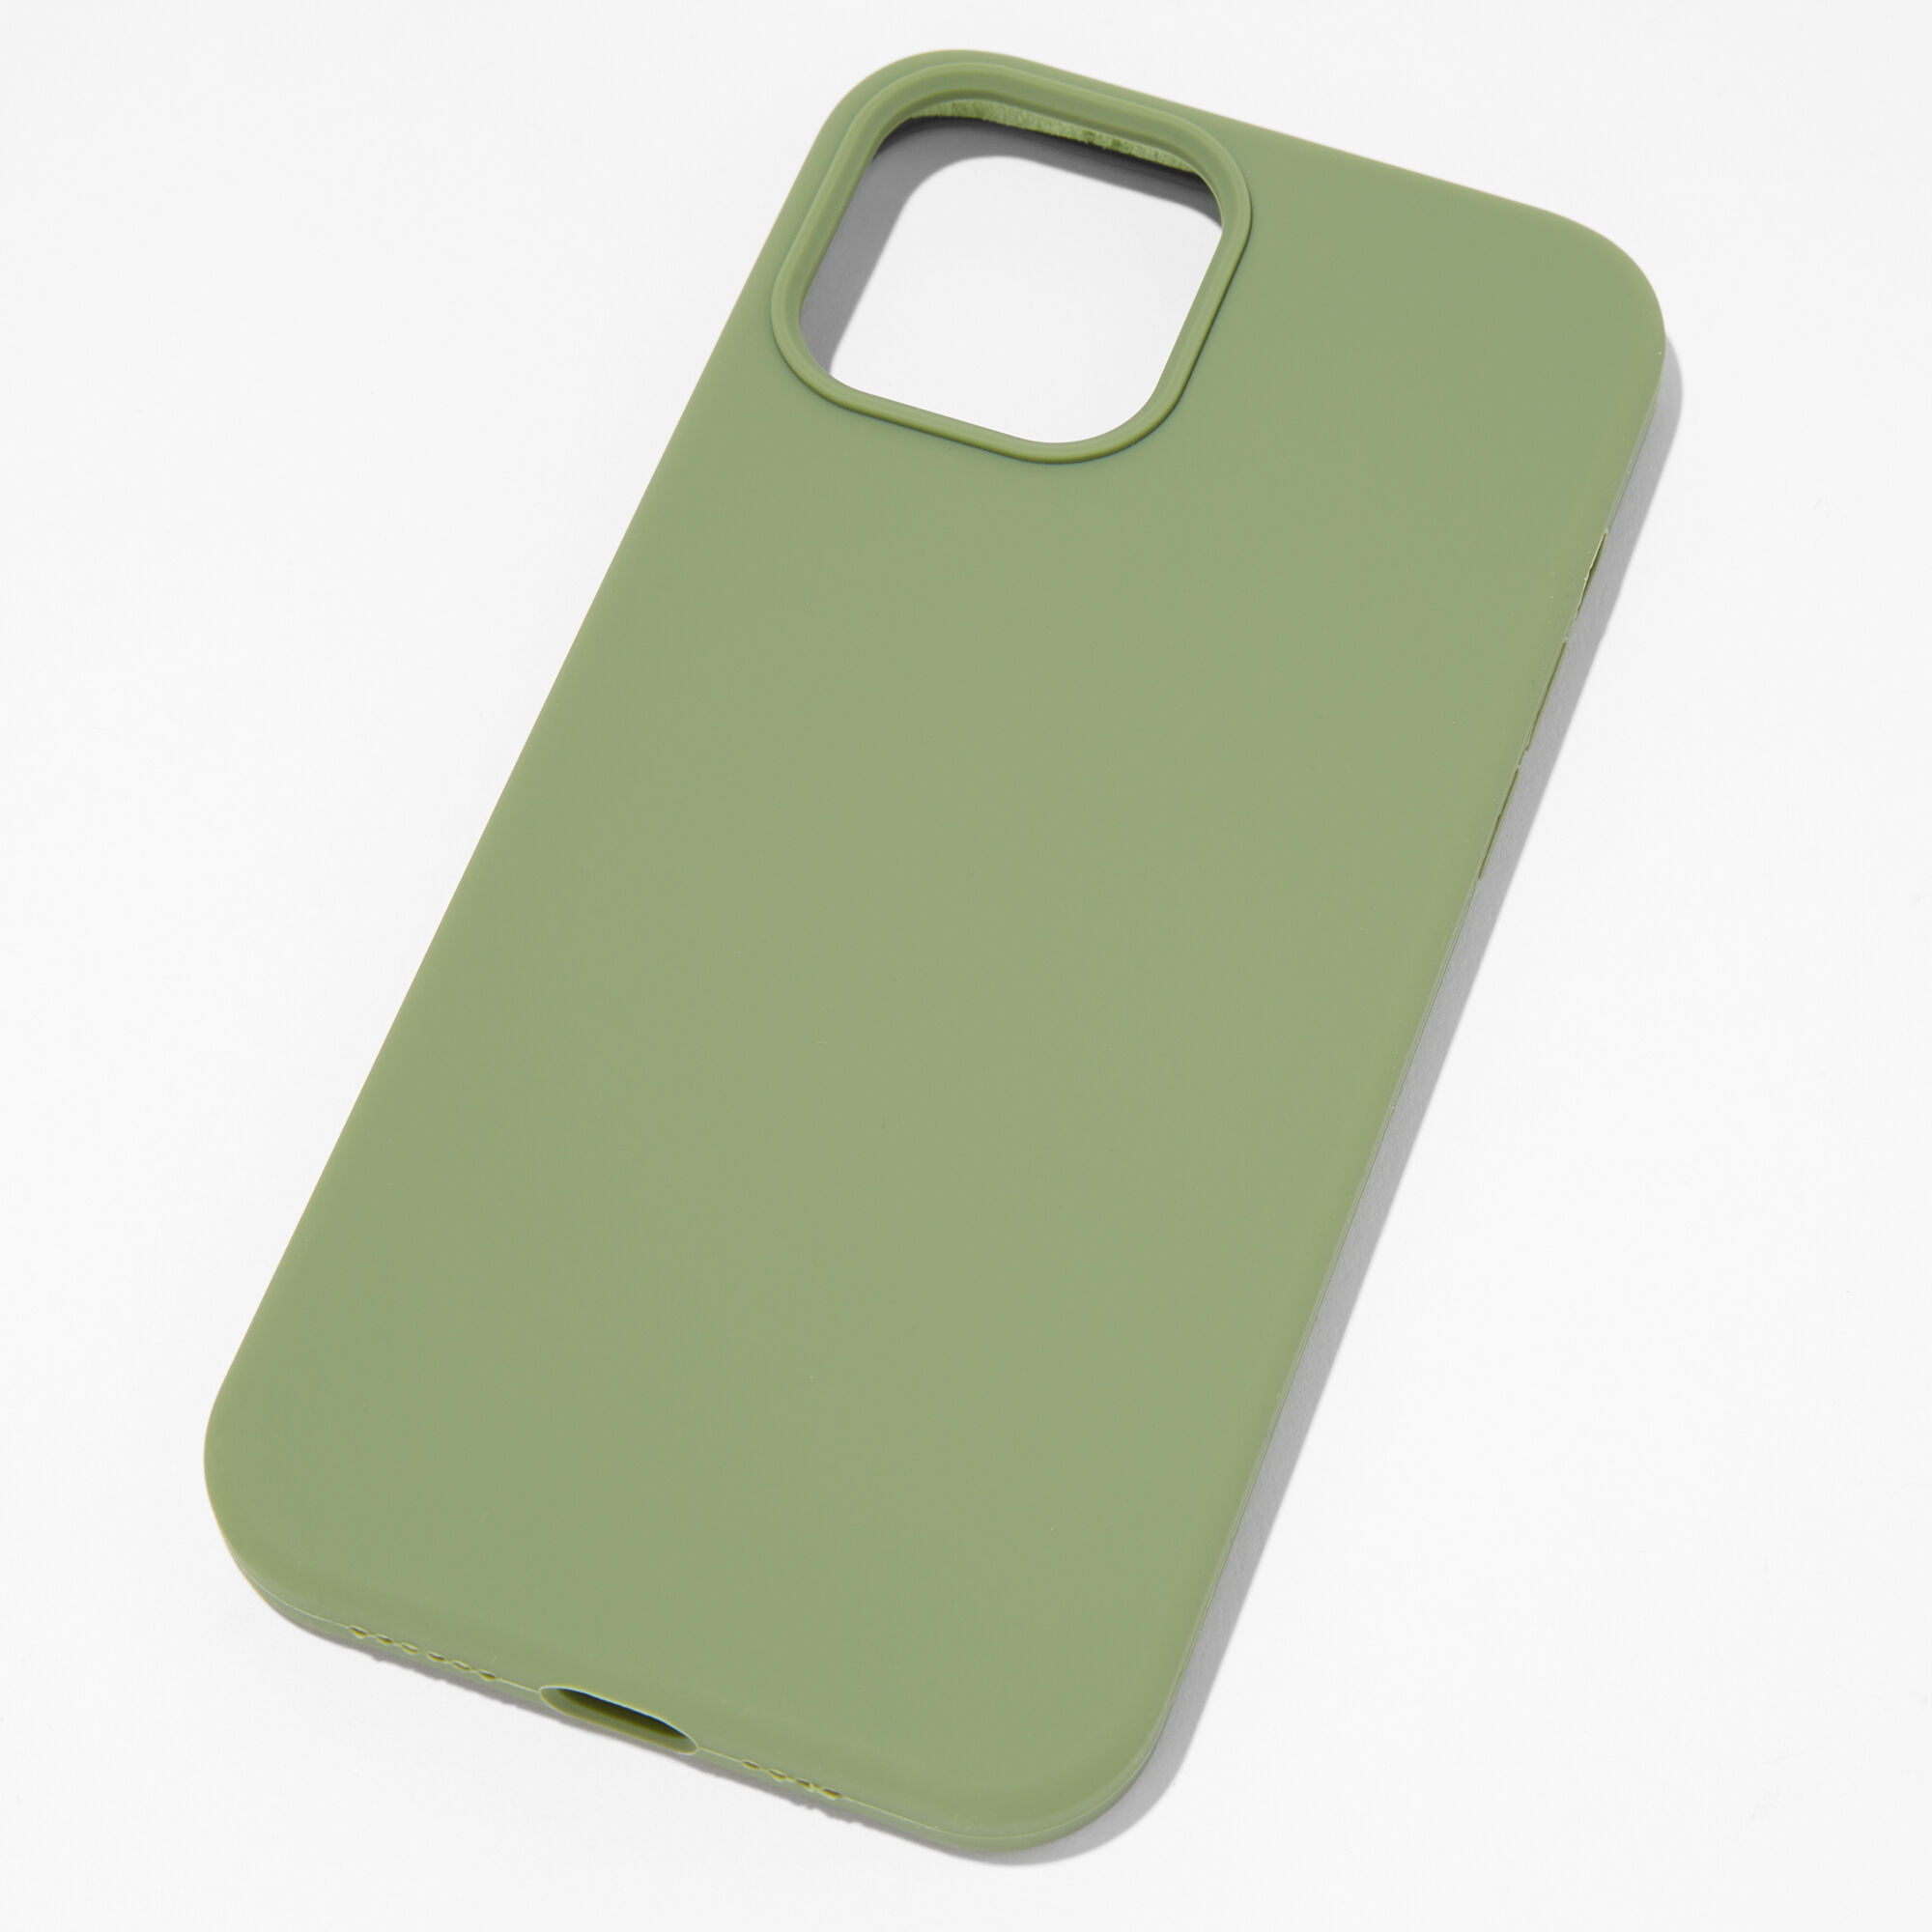 View Claires Solid Sage Phone Case Fits Iphone 12 Pro Max Green information